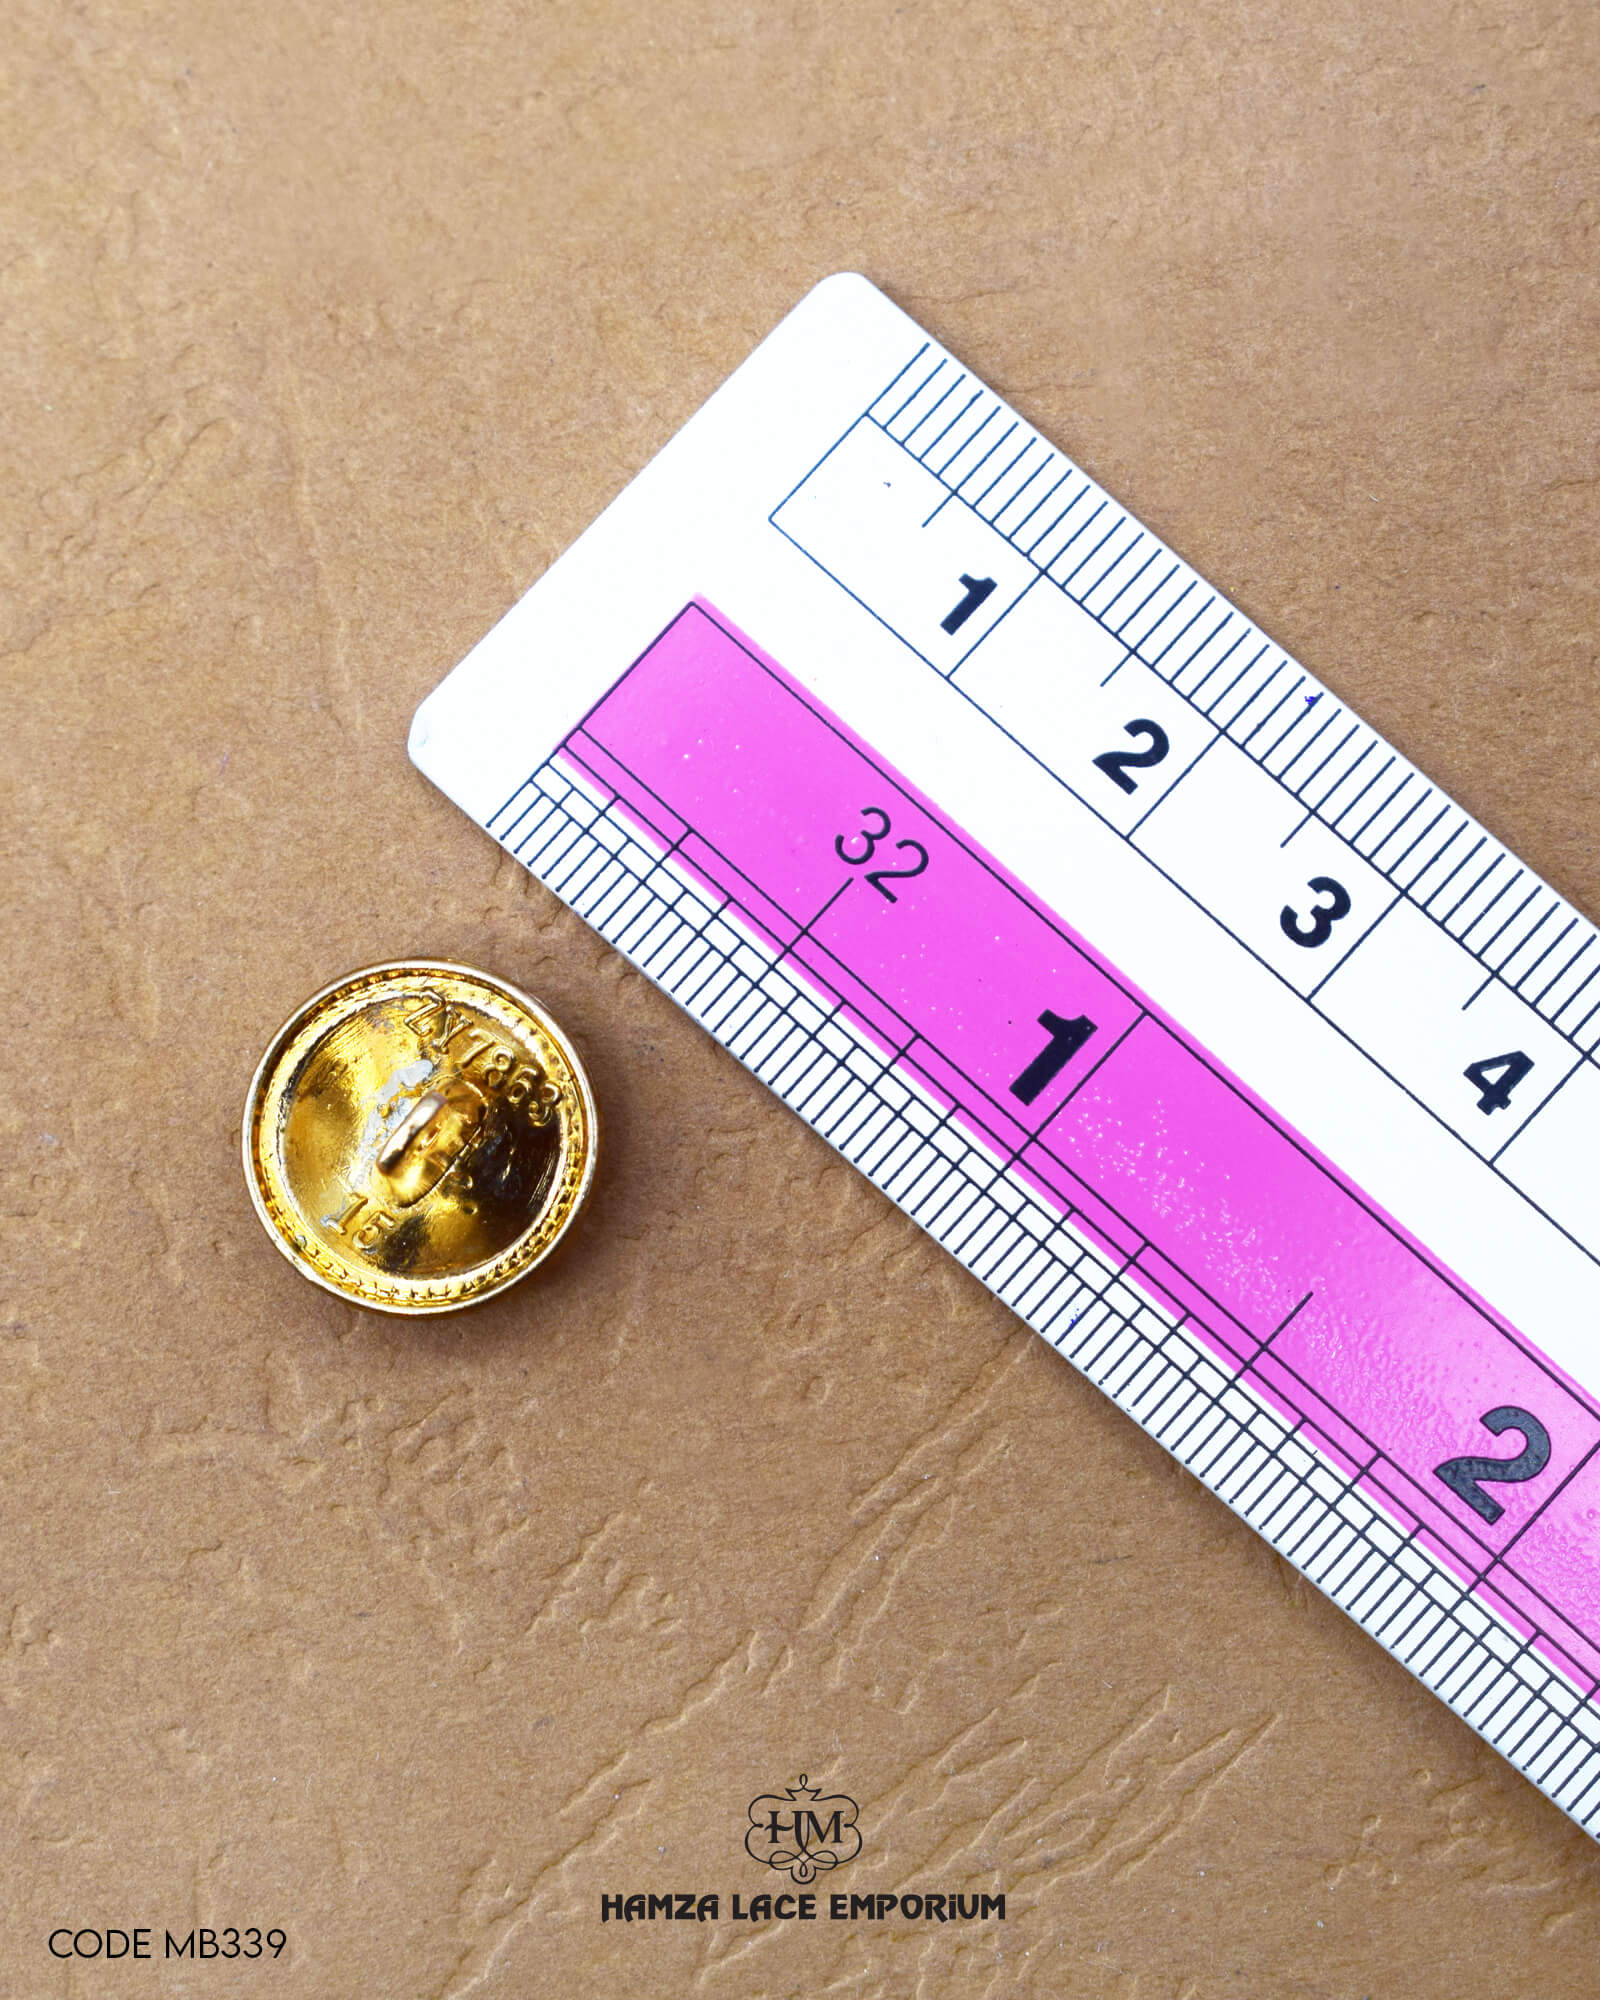 The size of the 'Golden Metal Button MB339' is measured by using a ruler